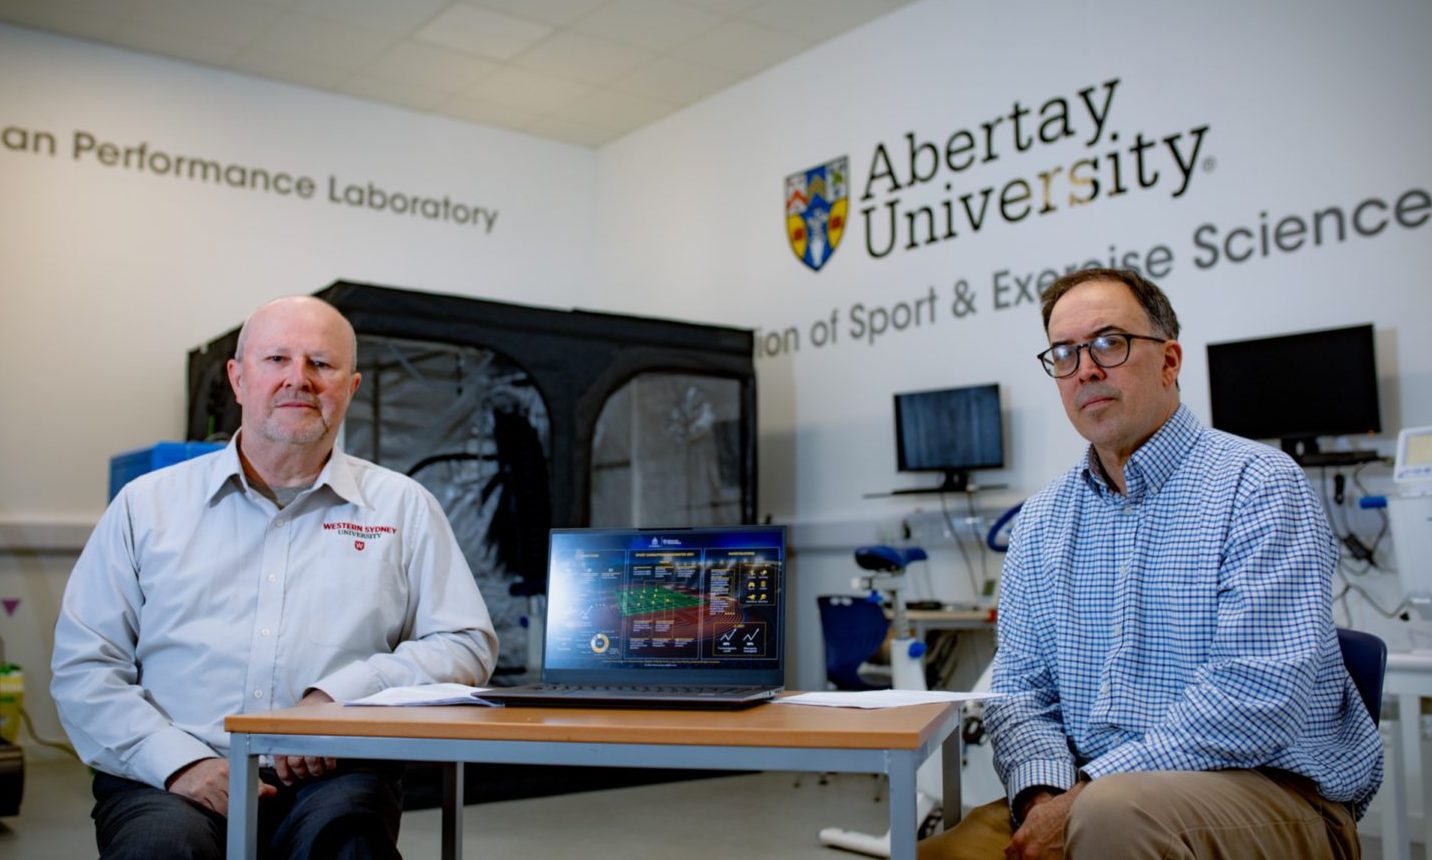 Dr Neil Hall from Western Sydney University and and Professor David Lavallee of Abertay University. Image: Abertay University.